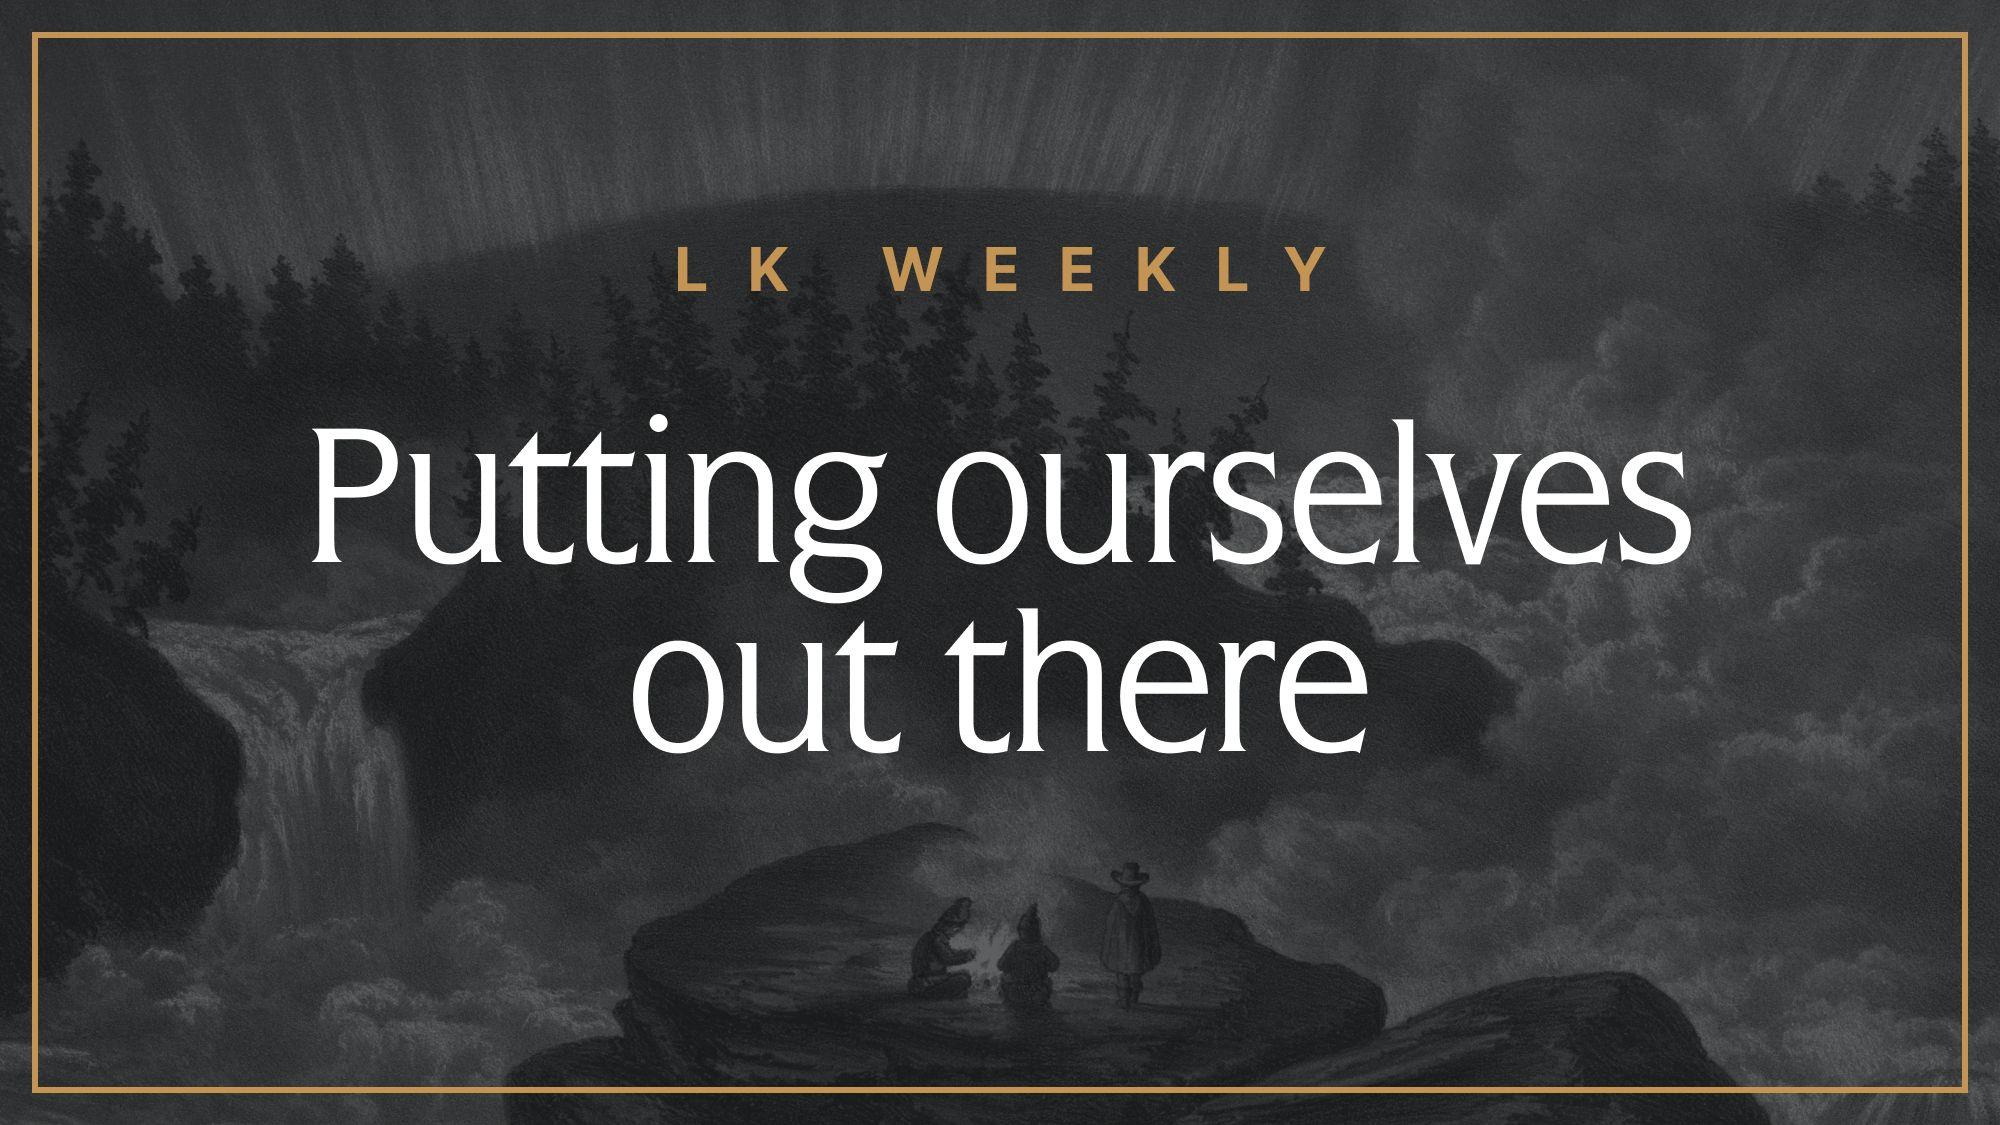 LK Weekly: Putting ourselves out there